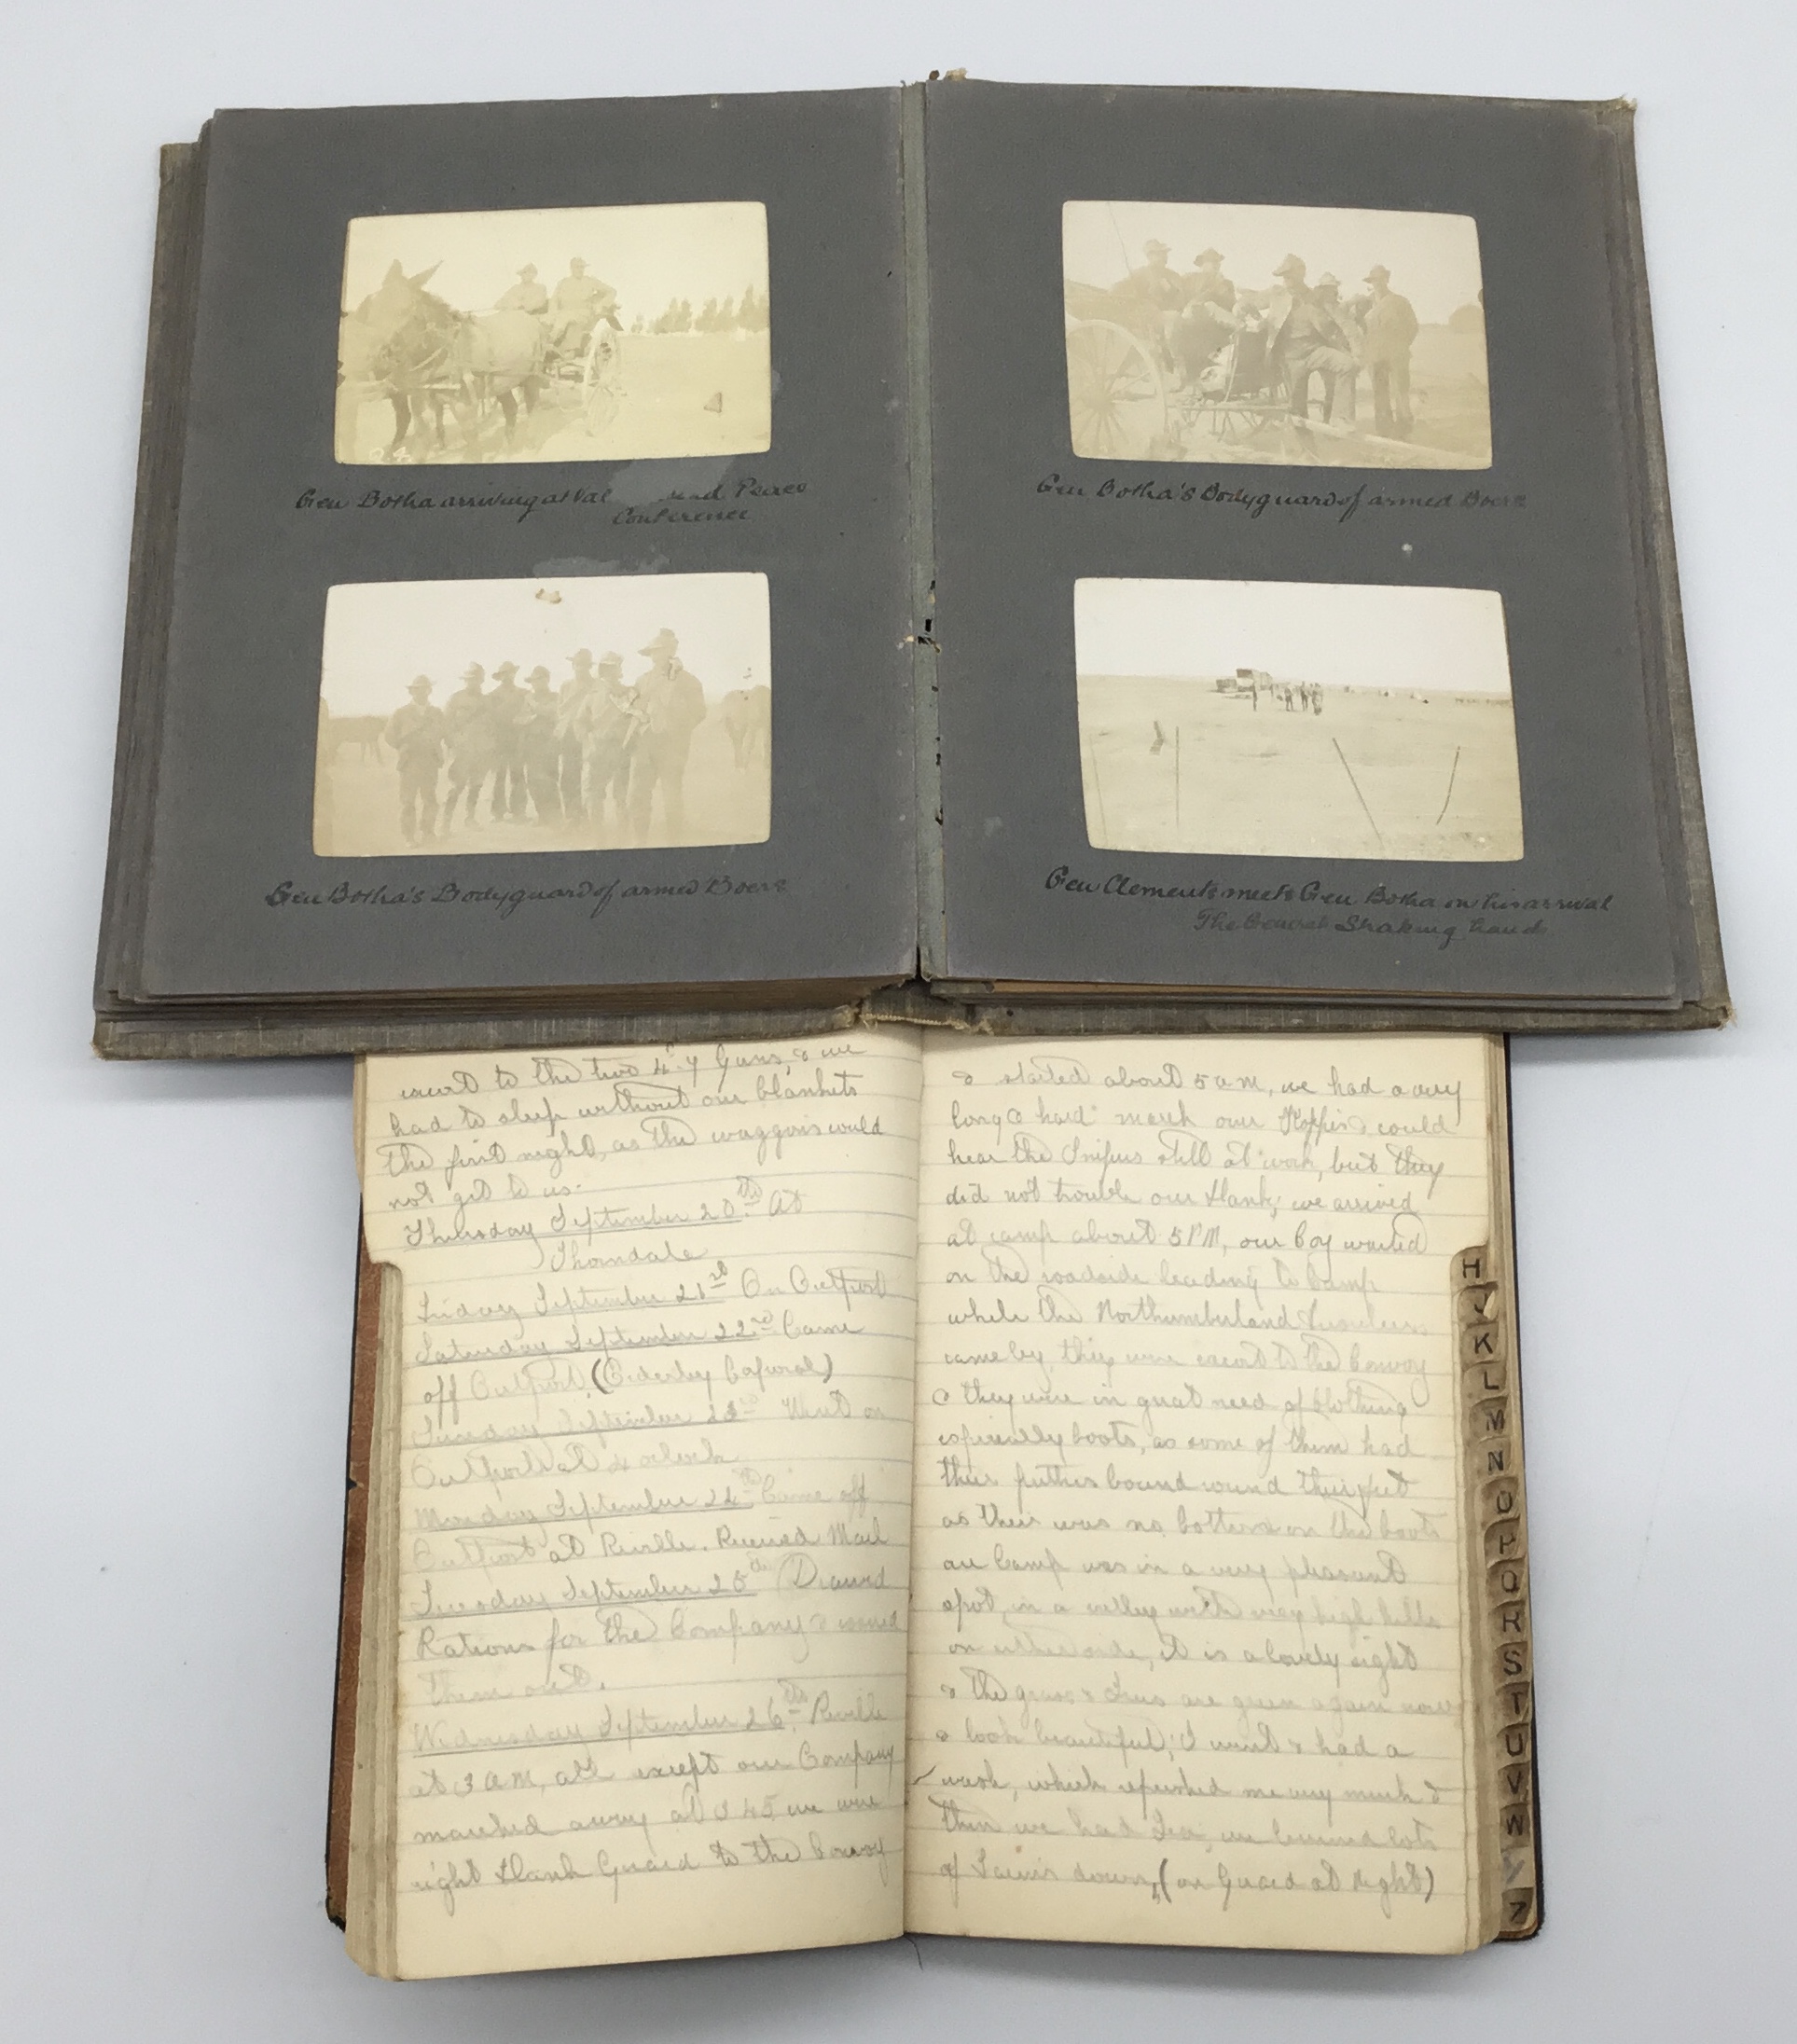 A fascinating and scarce early 20th century Boer War era photograph album, and diary, once belong to